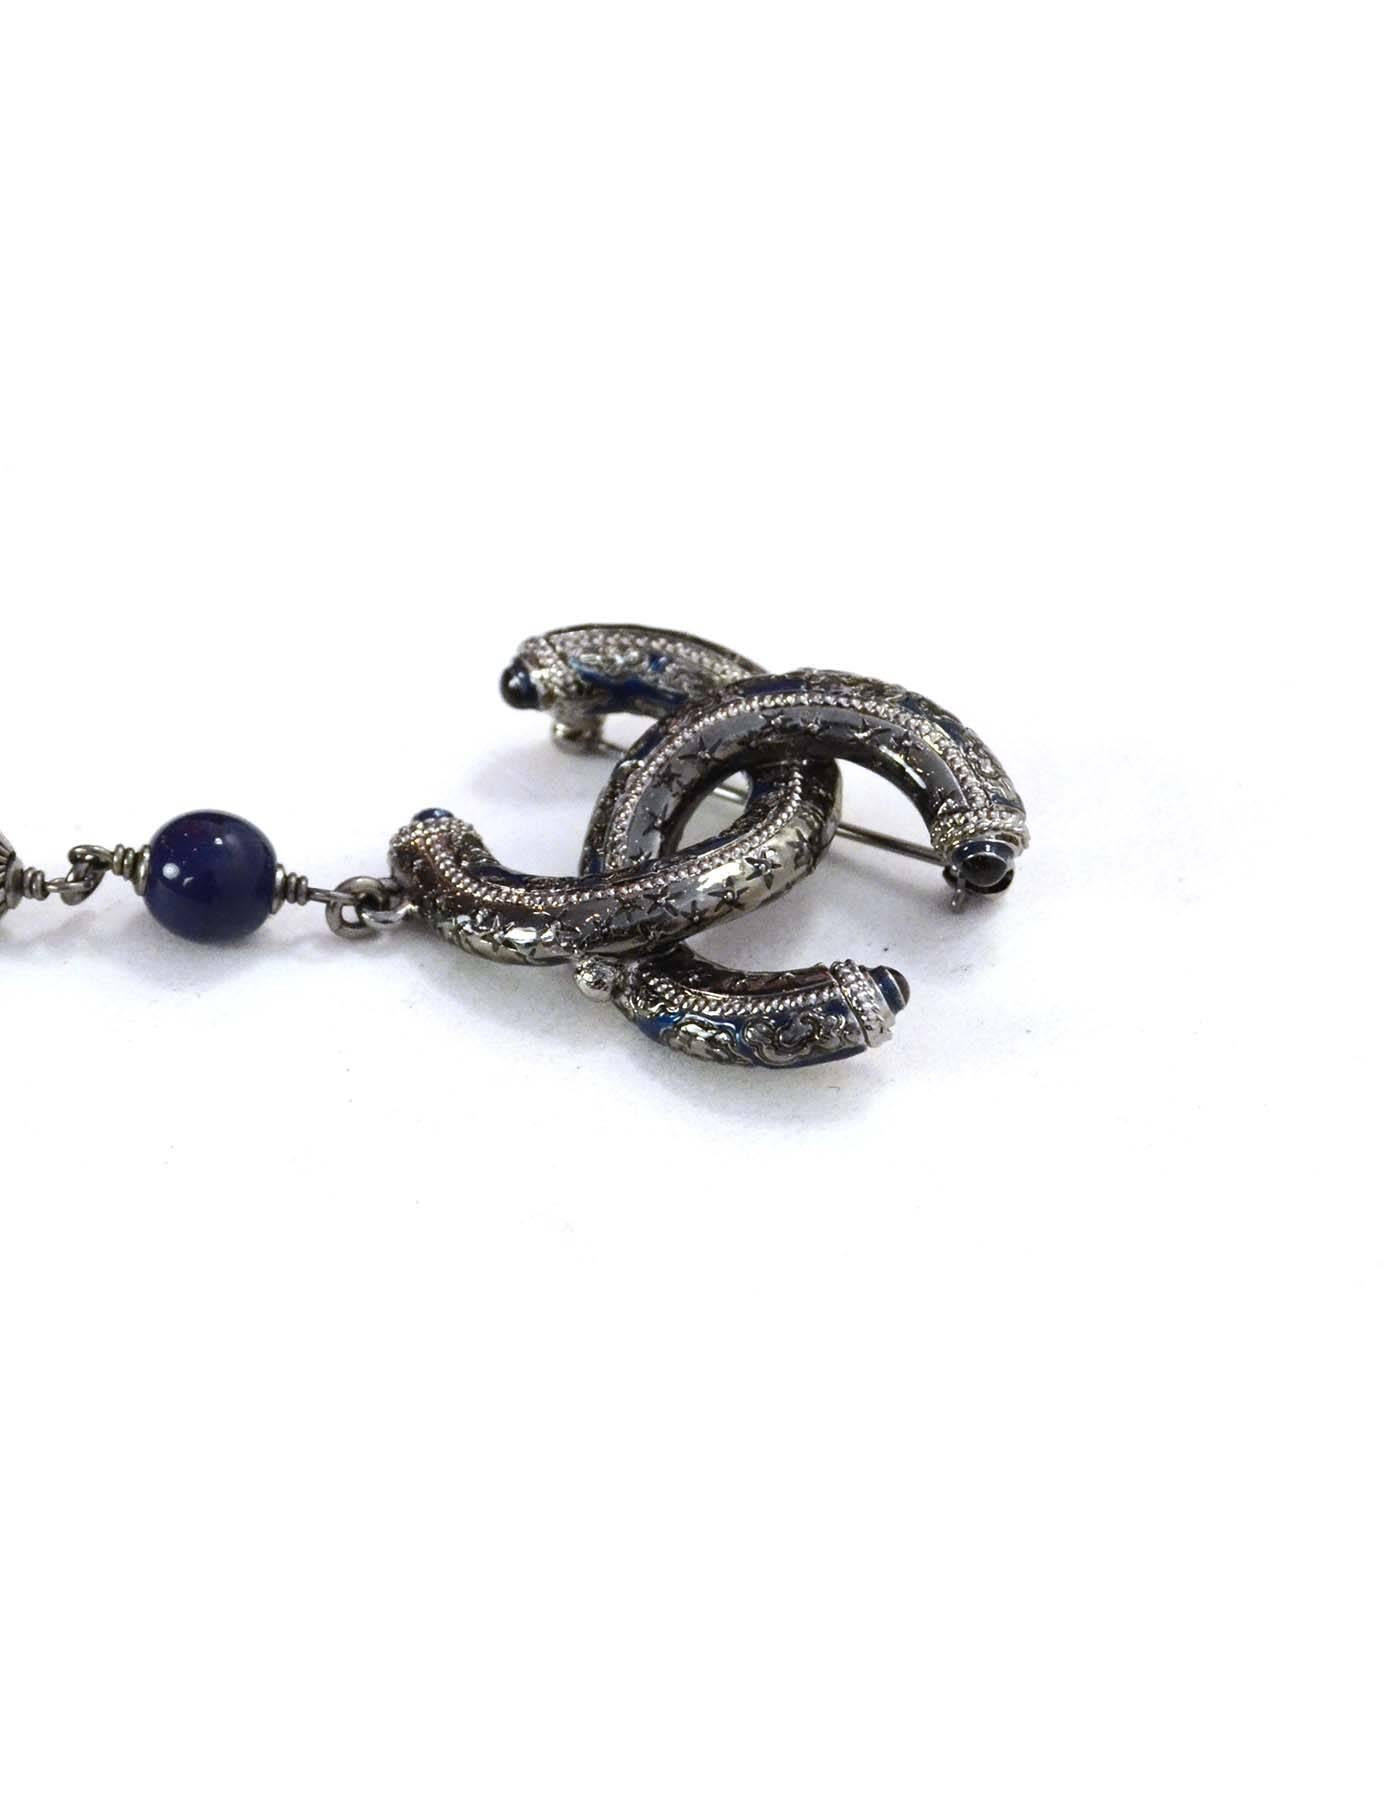 Chanel Double CC Chain Brooch
Features two CC pins with metal and bead chain in between

    Made In: France
    Year of Production: 2010
    Color: Gunmetal and blue
    Materials: Metal and beads
    Closure: Double pin back closure
   